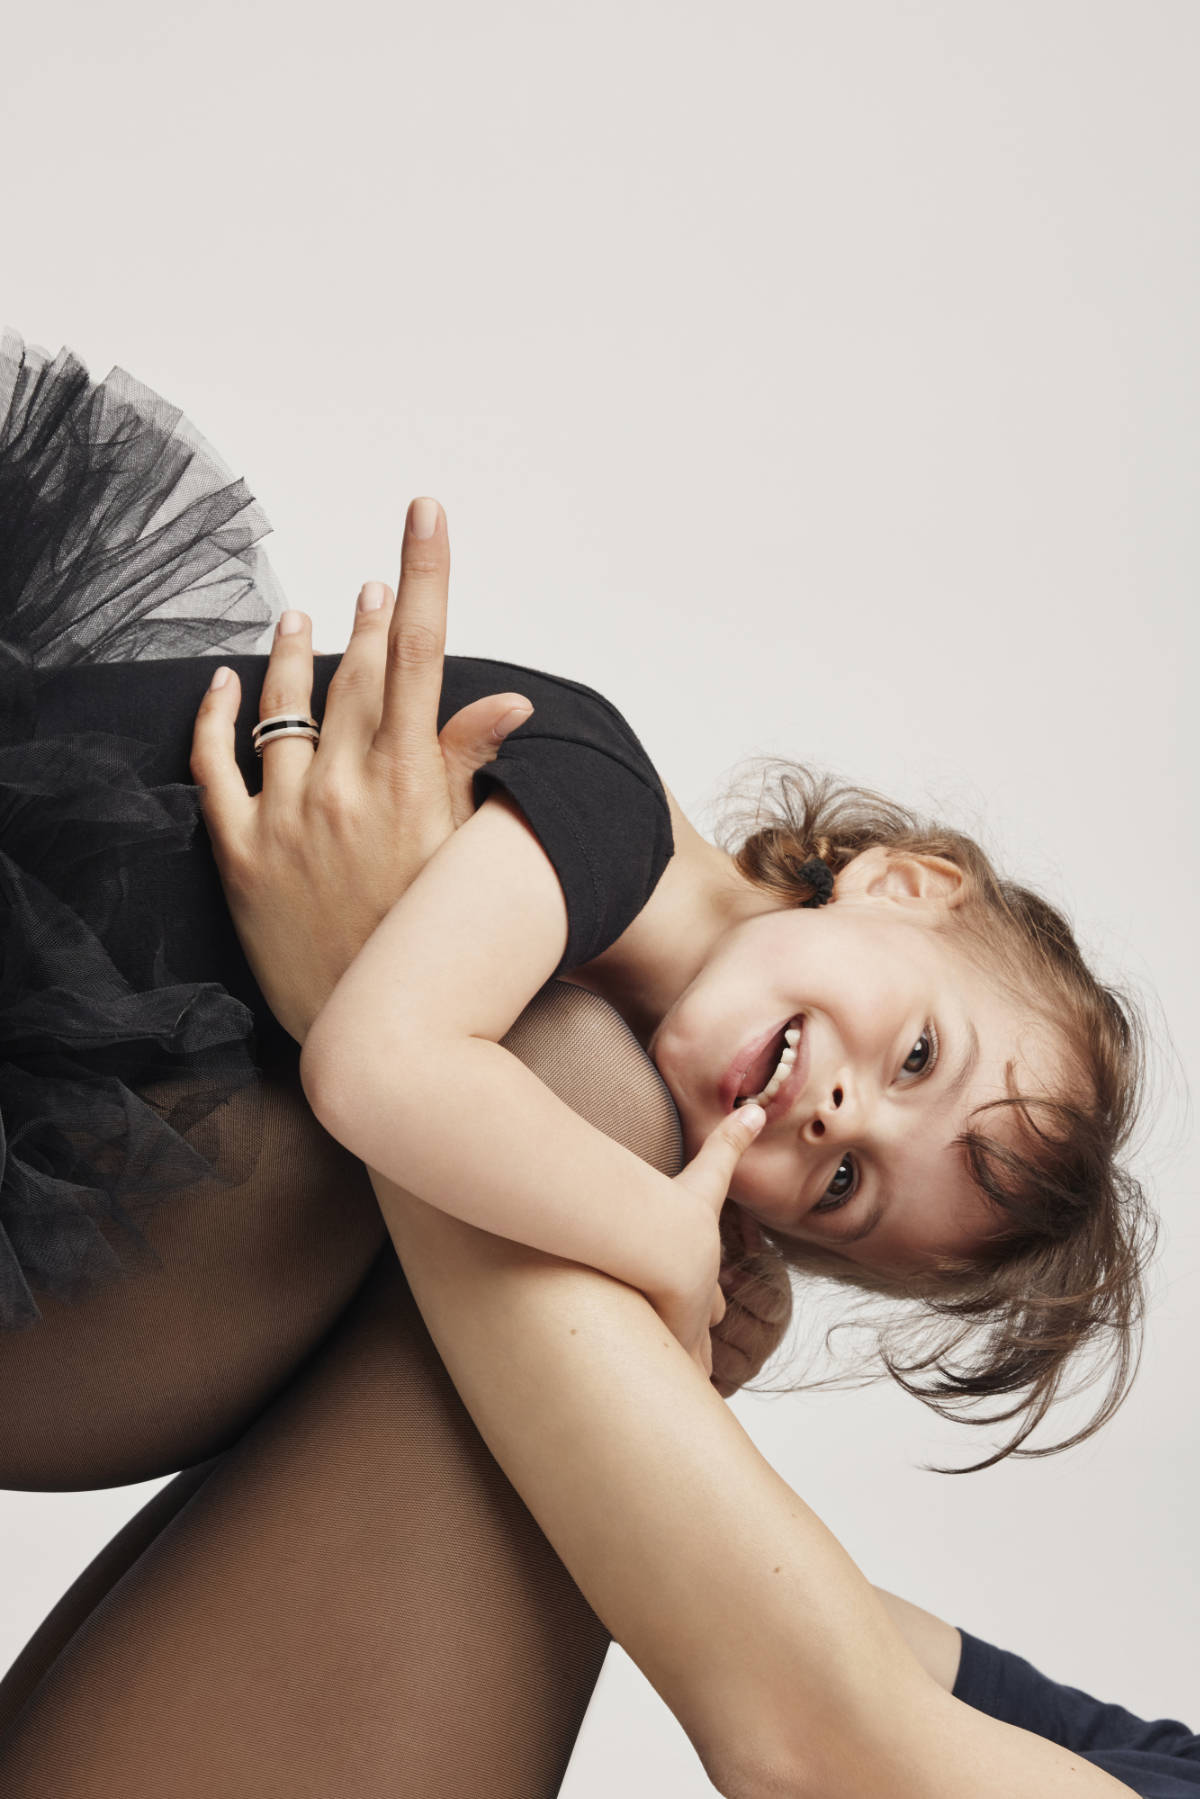 Bulgari And Save The Children Make A Special Wish For All Mothers In The World